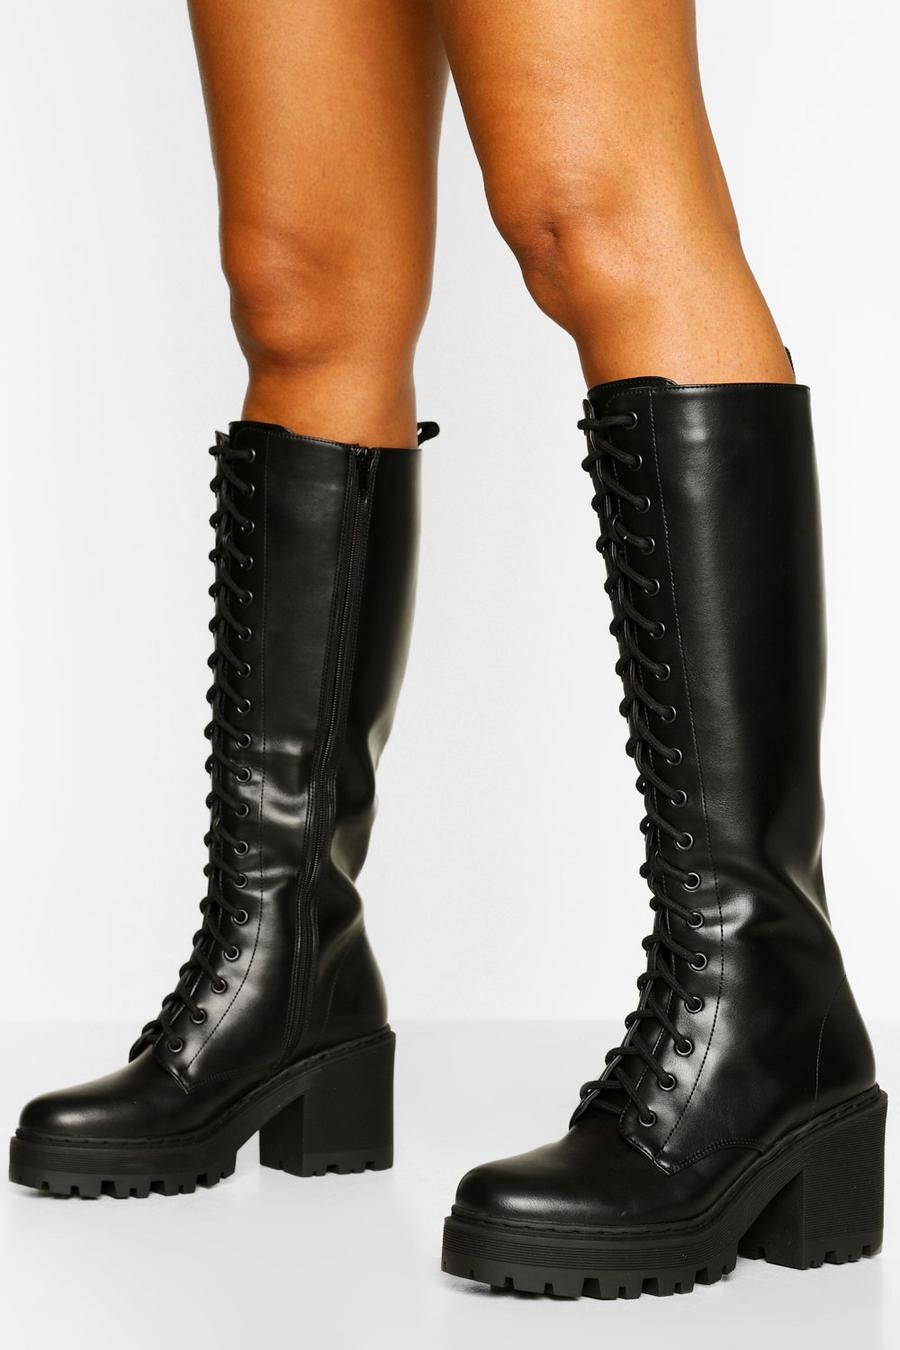 Black Knee High Lace Up Chunky Hiker Boots